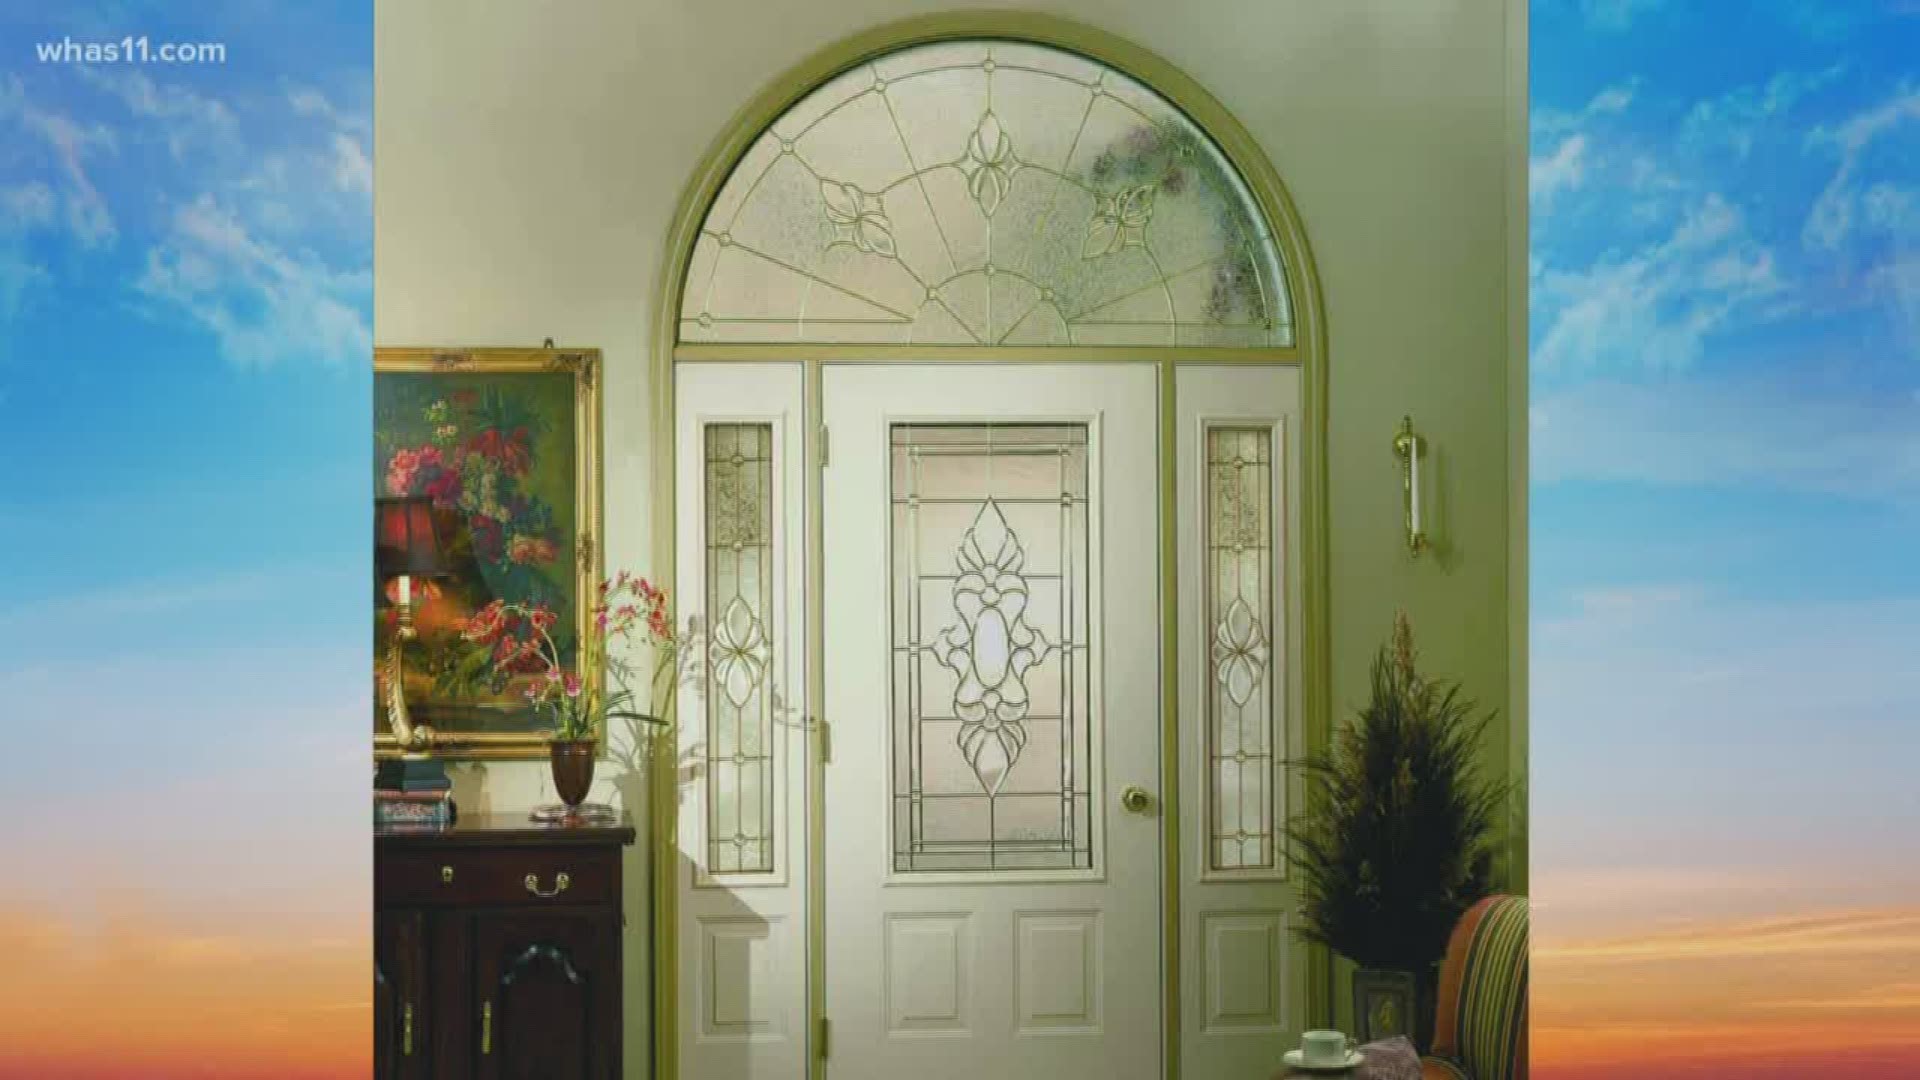 If you want to take a look at the options for replacing doors and windows, you can find more details at CHSWindows.com. The phone number is 1-800-476-1966.